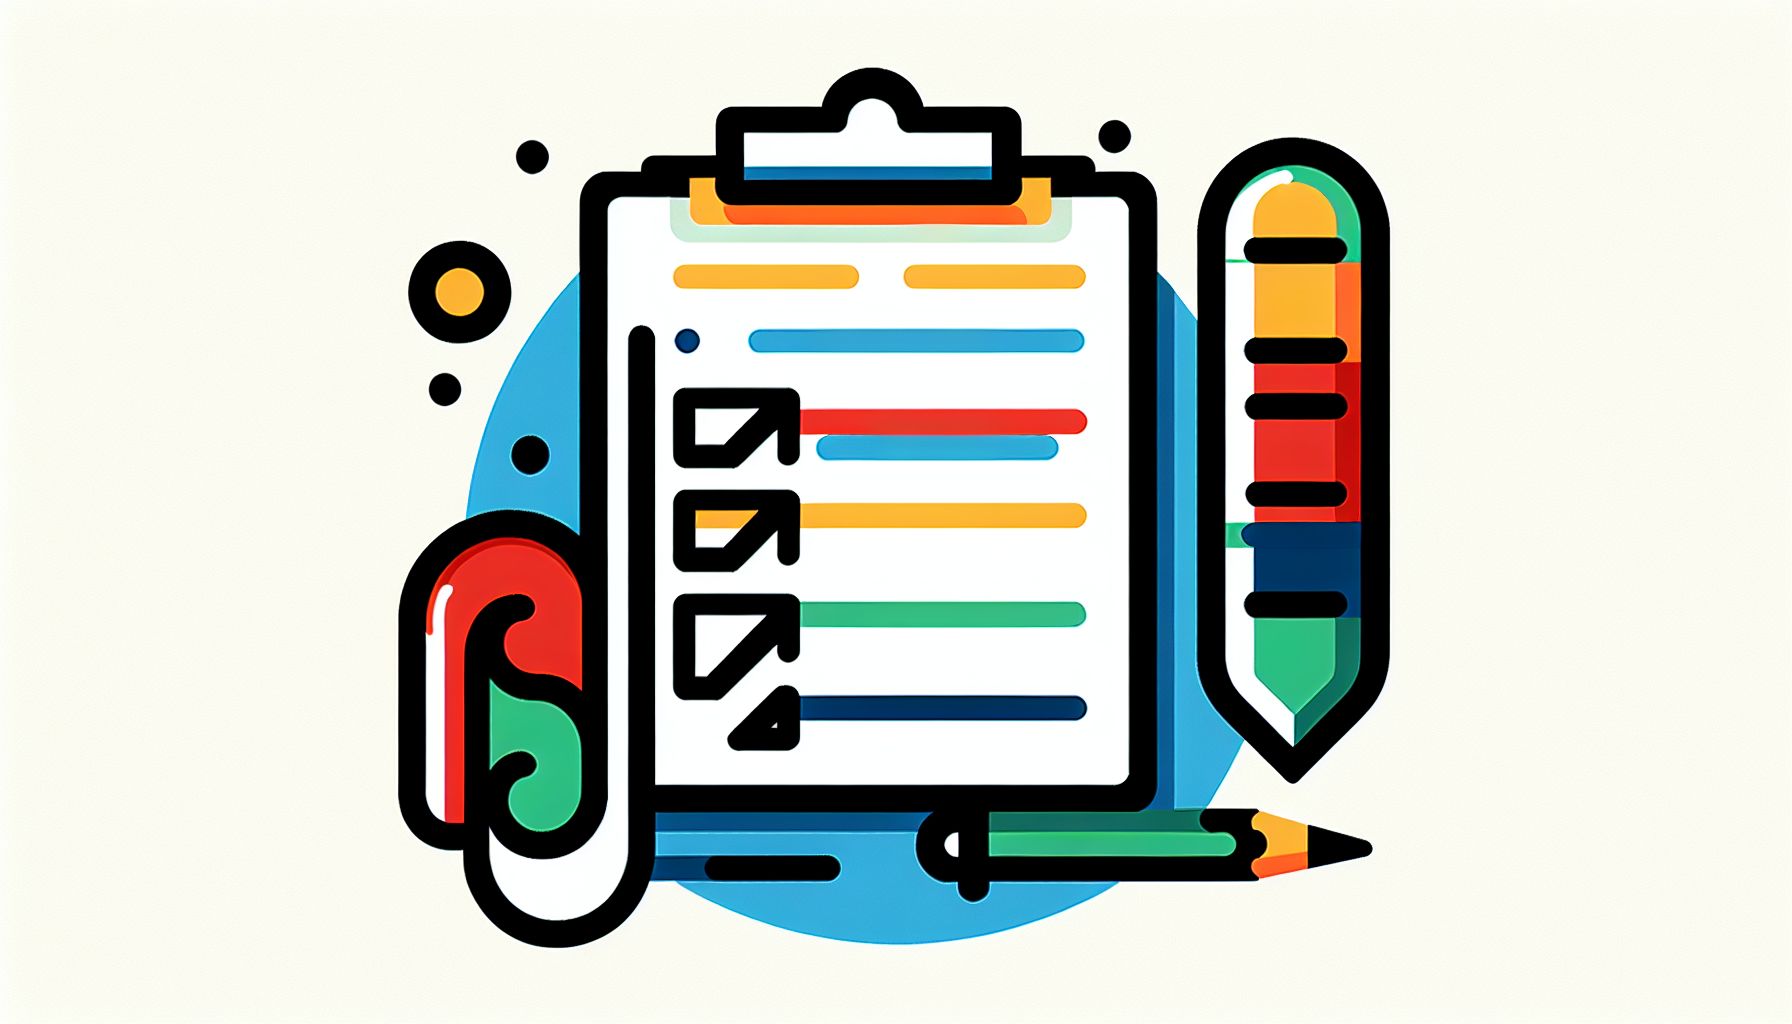 Checklist in flat illustration style and white background, red #f47574, green #88c7a8, yellow #fcc44b, and blue #645bc8 colors.